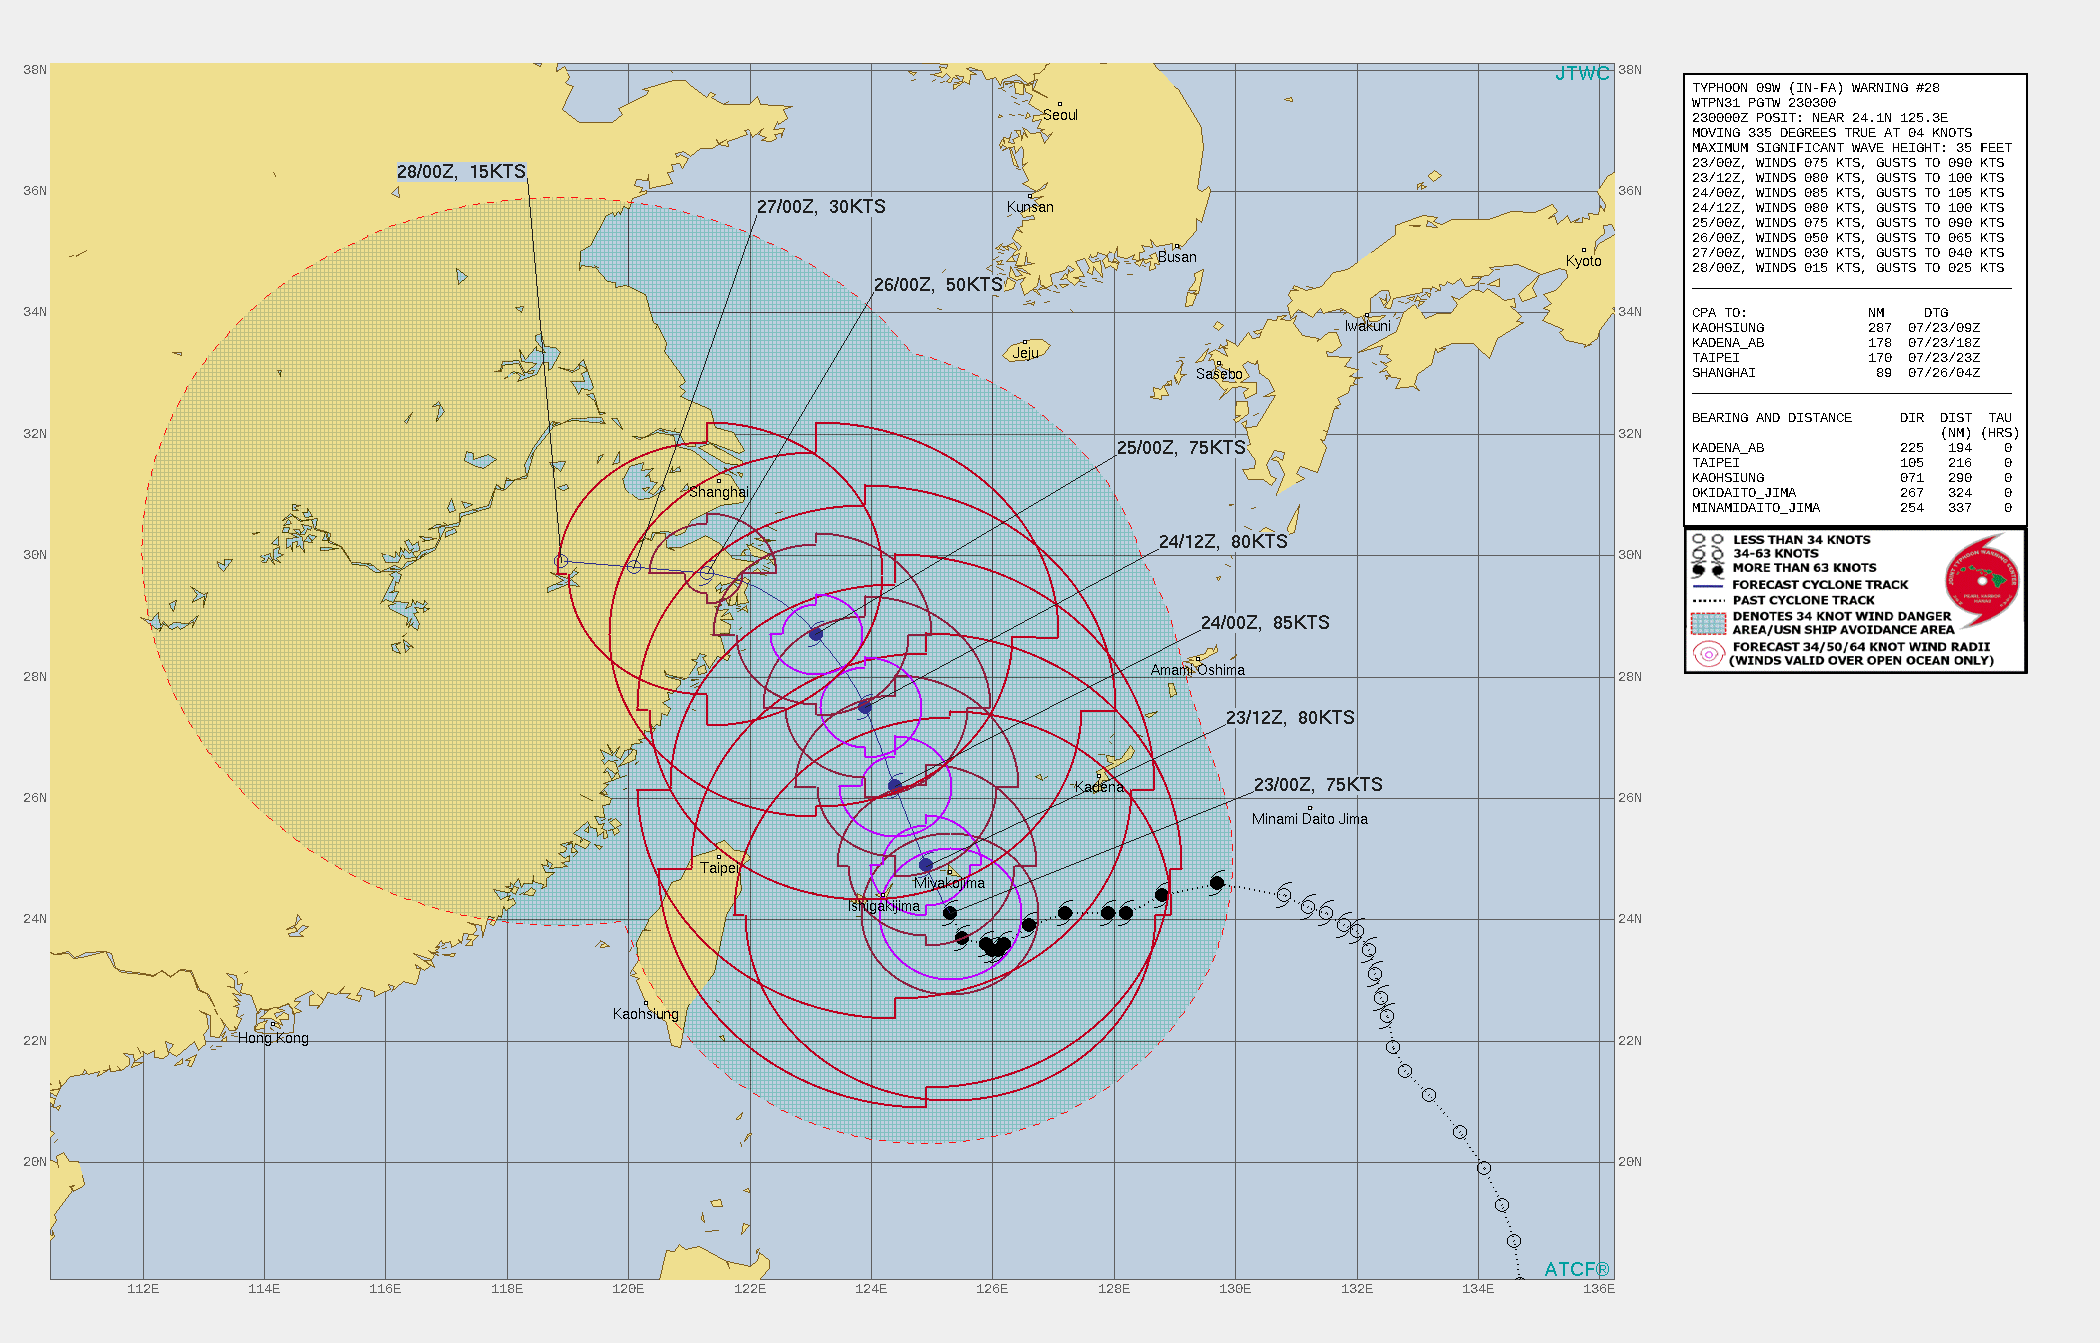 TY 09W(IN-FA). WARNING 28 ISSUED AT 23/03UTC.THERE ARE NO SIGNIFICANT CHANGES TO THE FORECAST FROM THE PREVIOUS WARNING.  FORECAST DISCUSSION: PRESSURE FALLS REPORTED OVER THE SOUTHERN SENKAKU ISLANDS VERIFY THE APPROACH OF TYPHOON IN-FA. THE SYSTEM HAS CLOCKED A LITTLE MORE TO THE RIGHT DURING THE PAST SIX HOURS AND IS NOW EXPECTED TO TRACK BETWEEN ISHIKAKIJIMA AND MIYAKOJIMA DURING THE NEXT 24 HOURS. ONCE CLEARING THE RYUKUS, COOLER WATERS ON  COUPLED WITH INCREASING VERTICAL WIND SHEAR WILL PUT THE SYSTEM ON A  WEAKENING TREND THROUGH THE DURATION OF ITS TRACK INTO EASTERN  CHINA. IT IS EXPECTED TO COME ASHORE AT SEVERE TROPICAL STORM  STRENGTH.